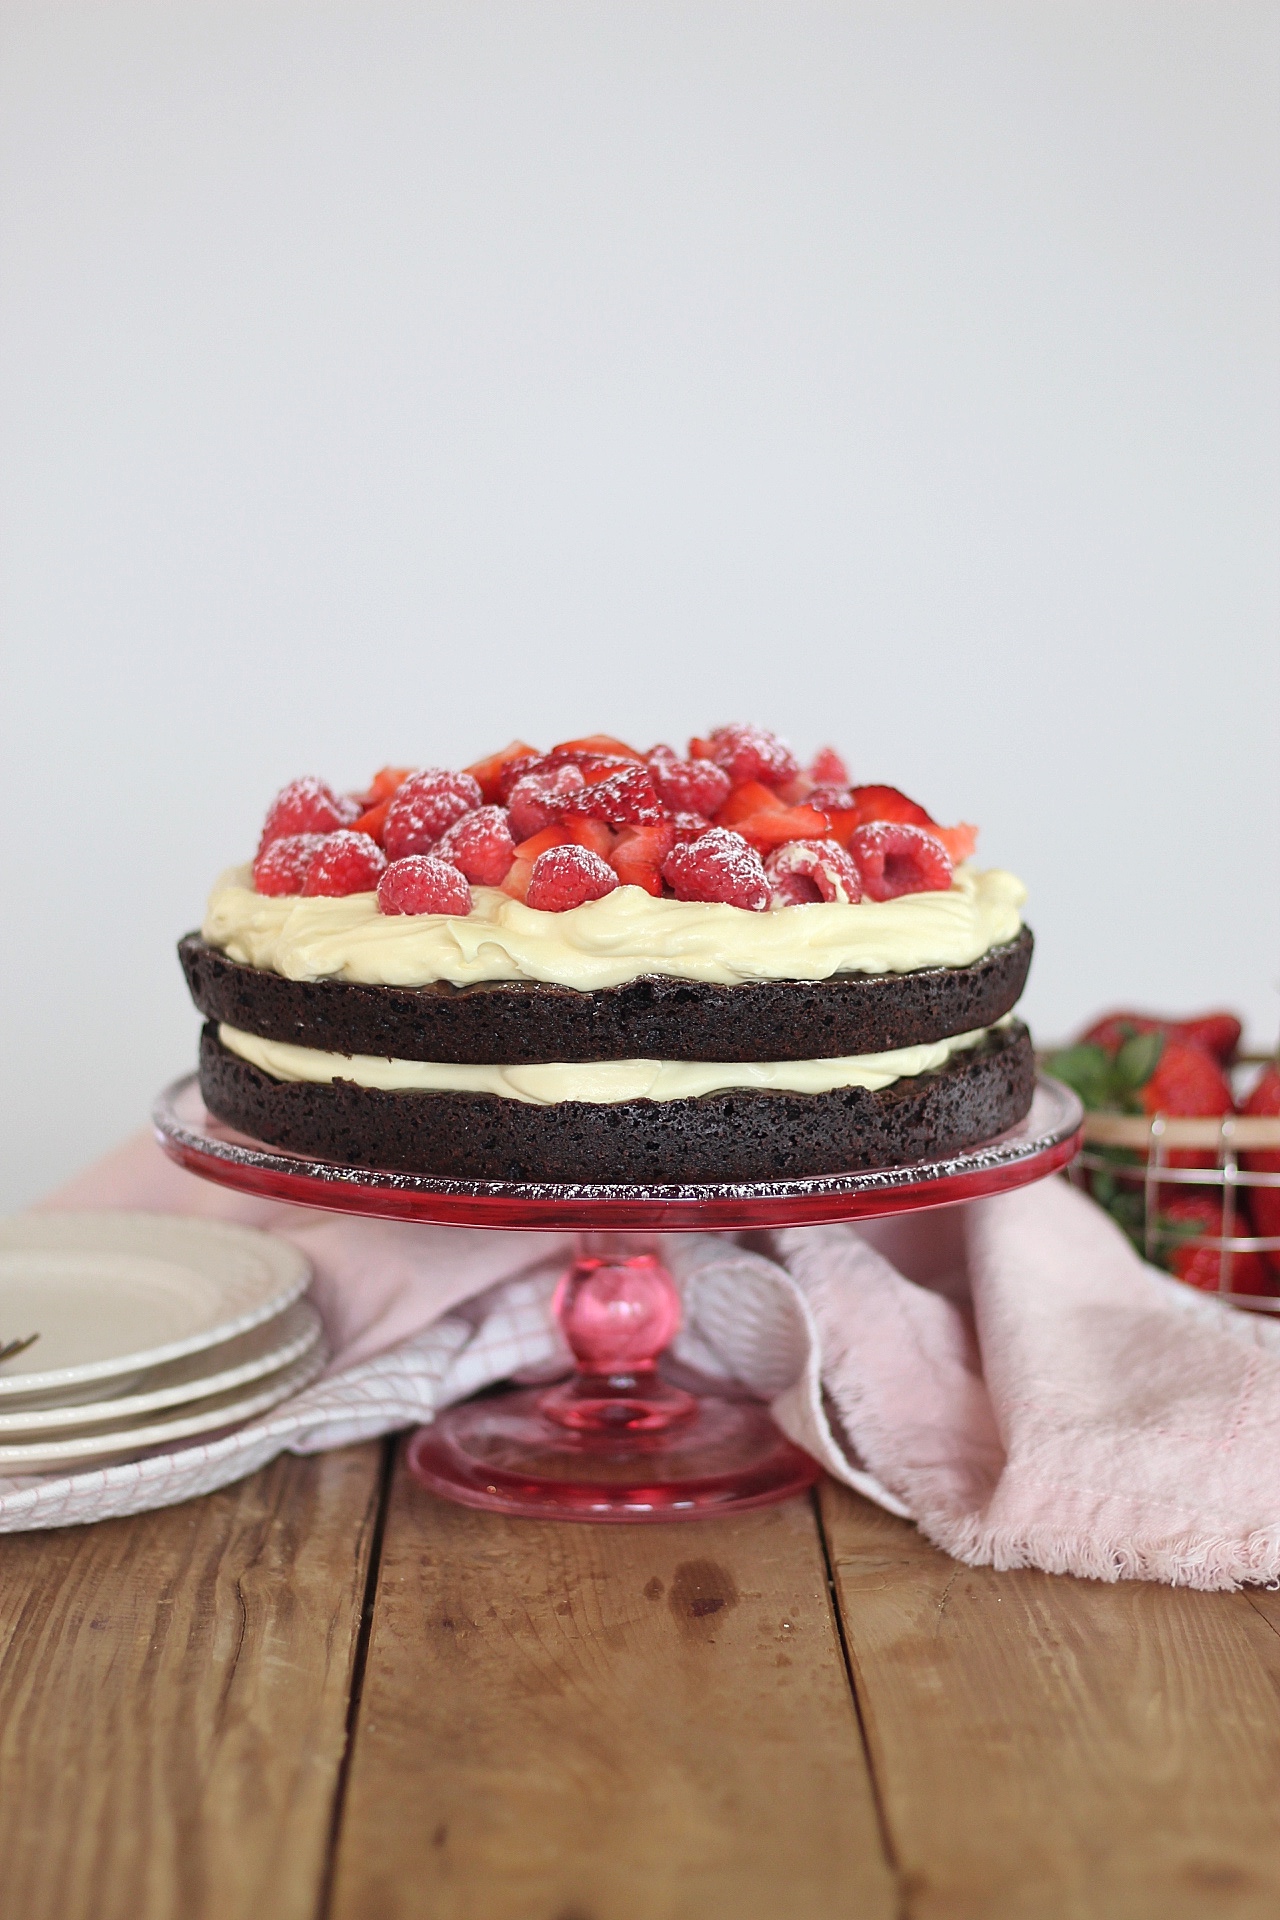 Brownie Berry Torte - decadent brownie layers, topped with a vanilla custard and fresh berries make for the easiest and most delicious, quick-fix dessert. #cakebycourtney #cake #browniecake #brownies #brownieberrytorte #easysbrownierecipe #easydessertrecipe 